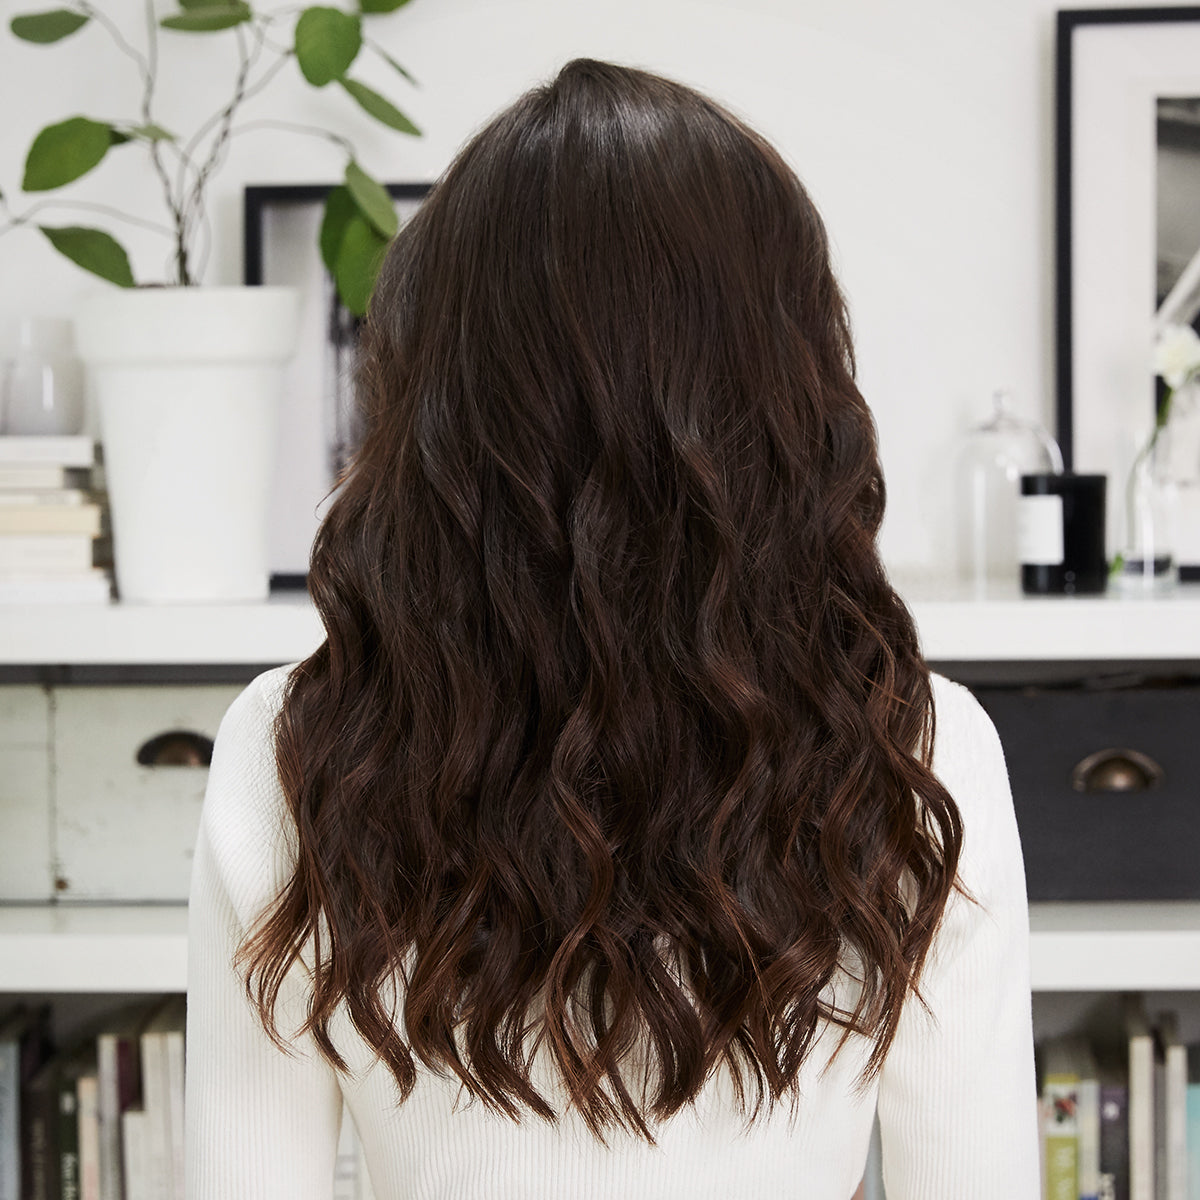 Back view of hair with beach waves using Bellissima Steam Elixir